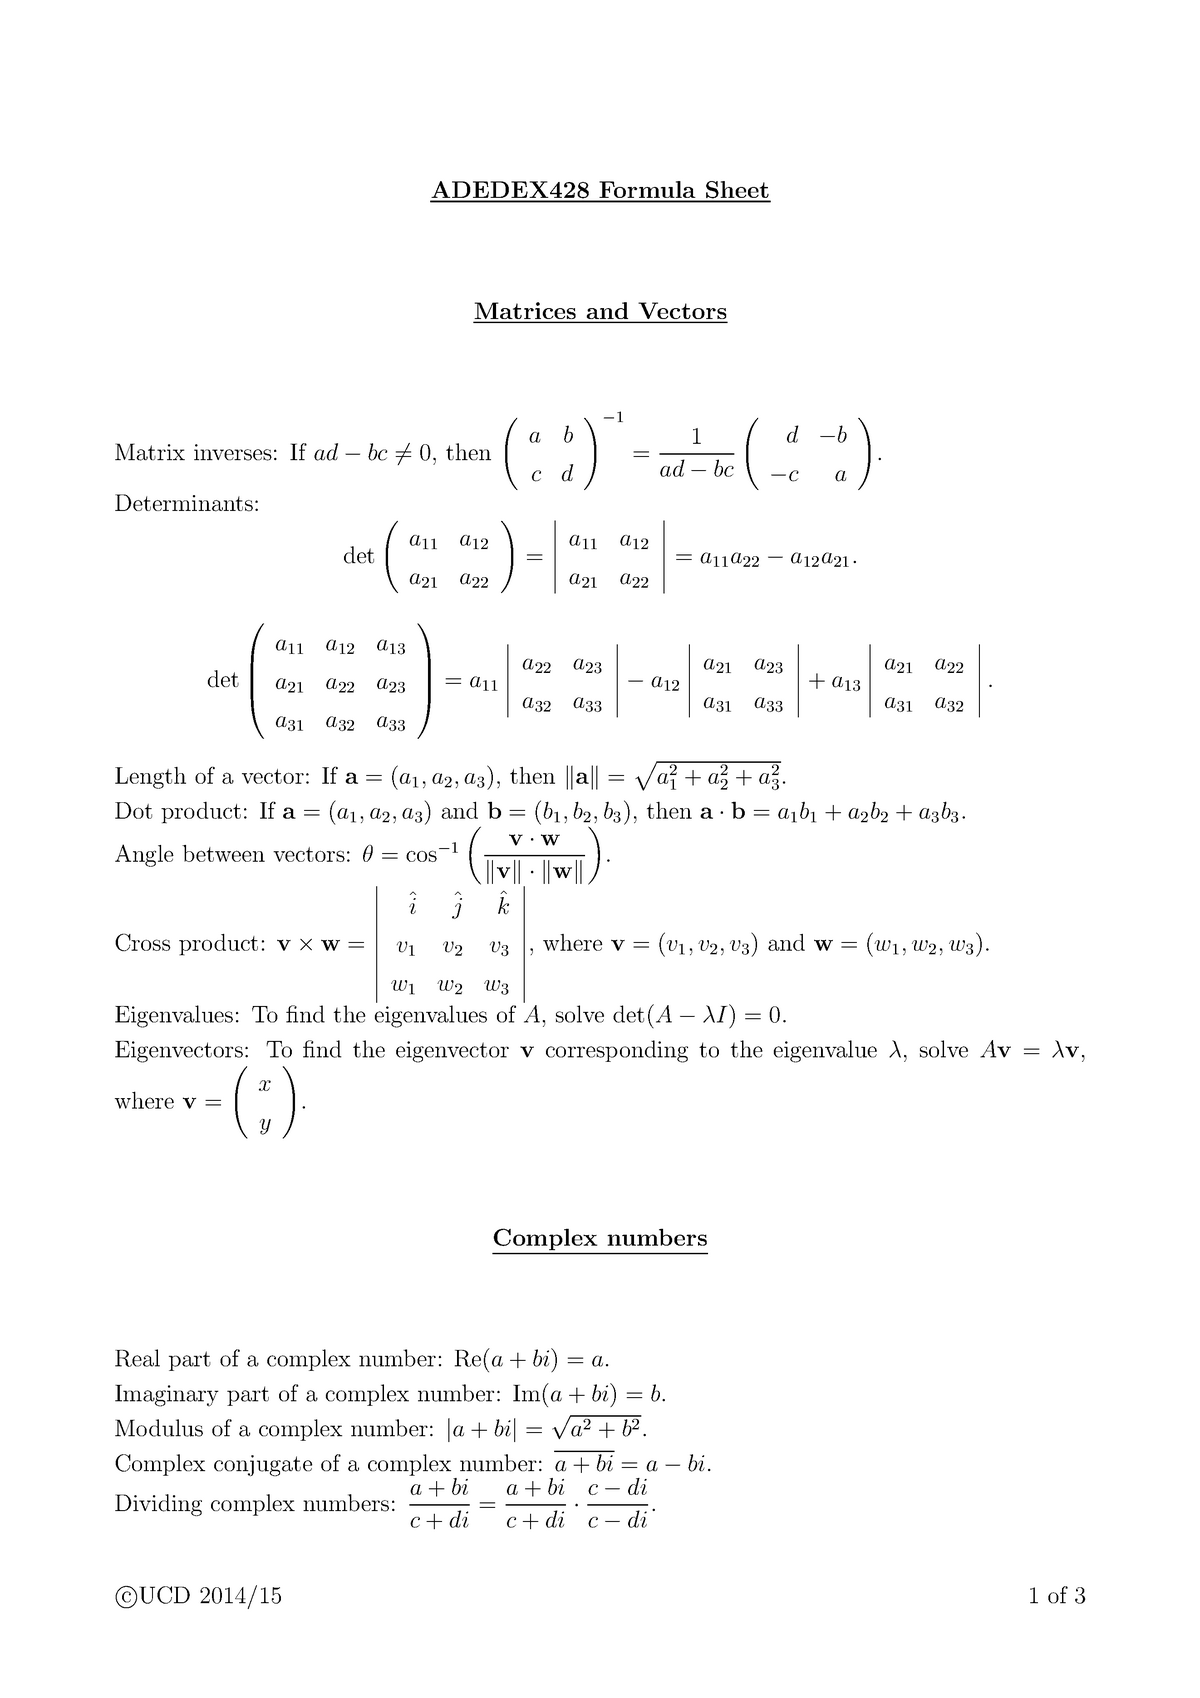 formula-sheet-matrices-and-differntiation-adedex428-formula-sheet-matrices-and-vectors-matrix